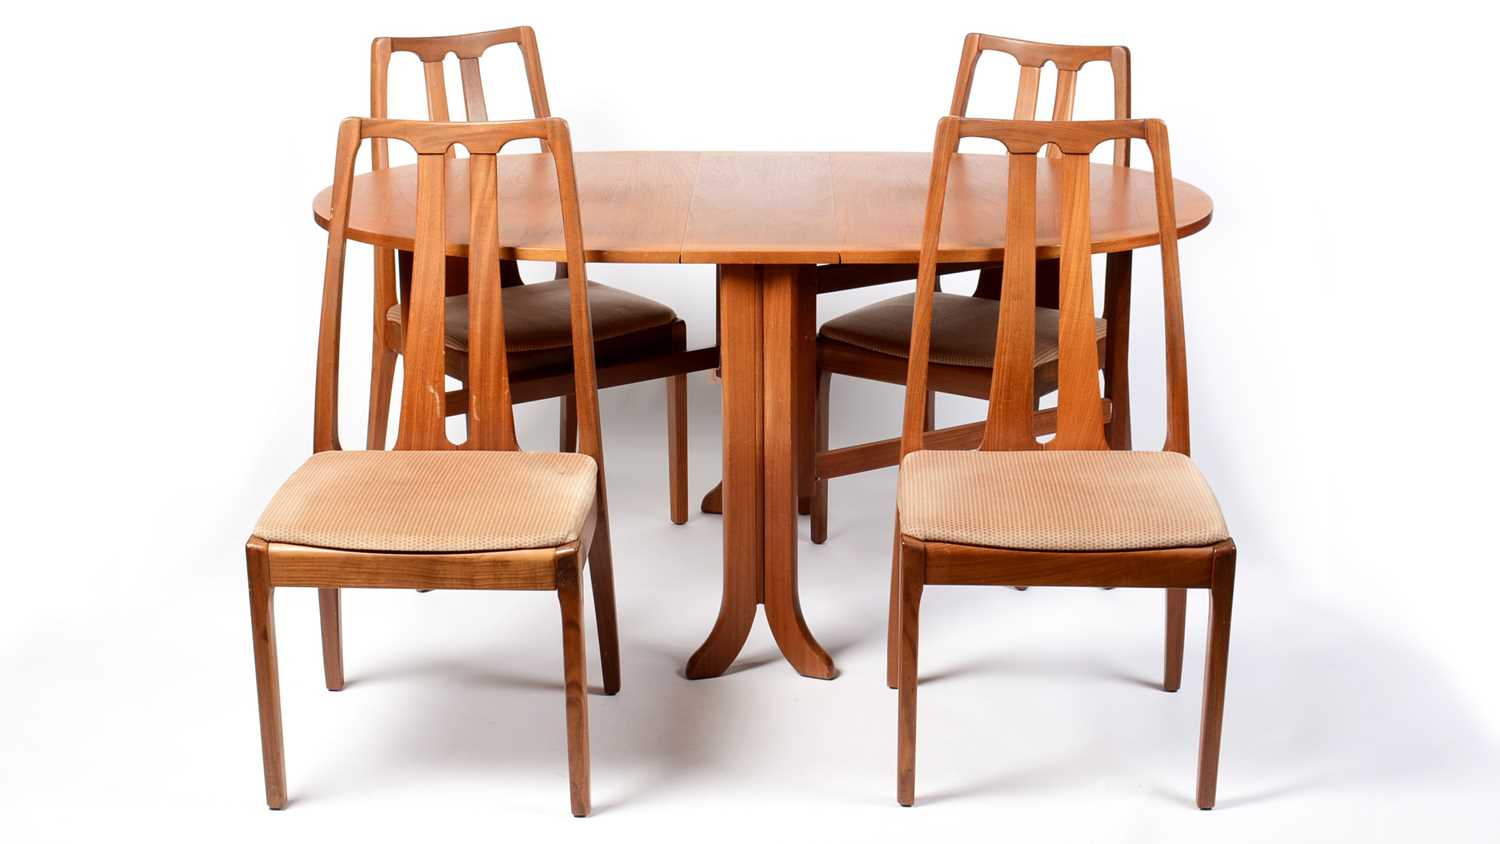 Lot 31 - Nathan - British modern design, a retro vintage teak wood extendable dining table and chairs.